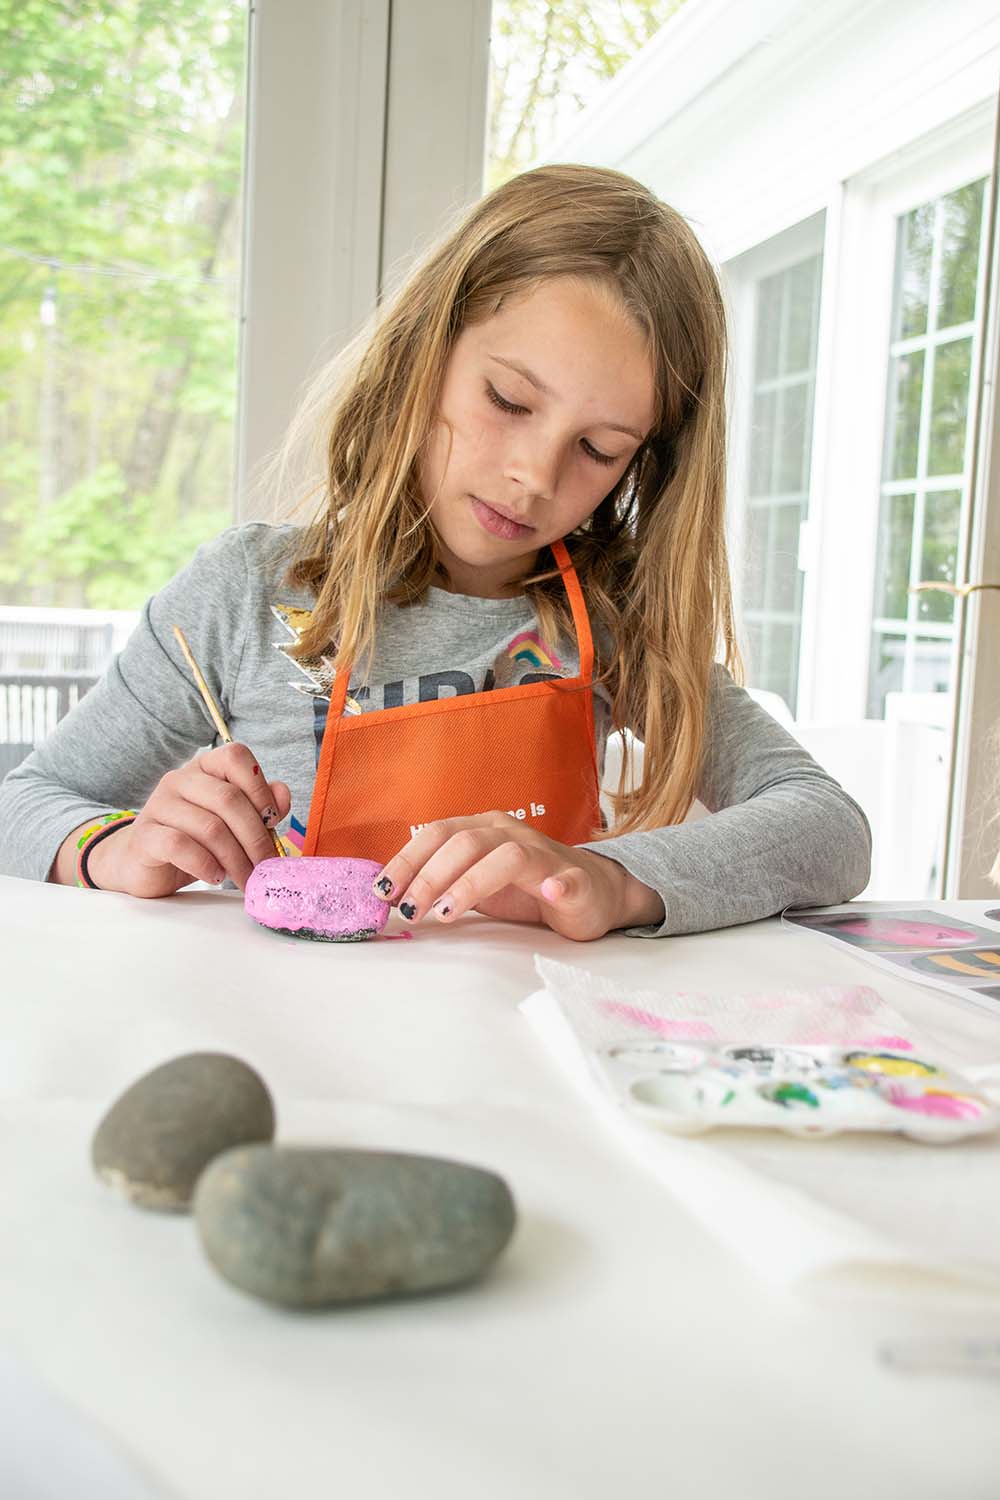 A child painting a rock bright pink.